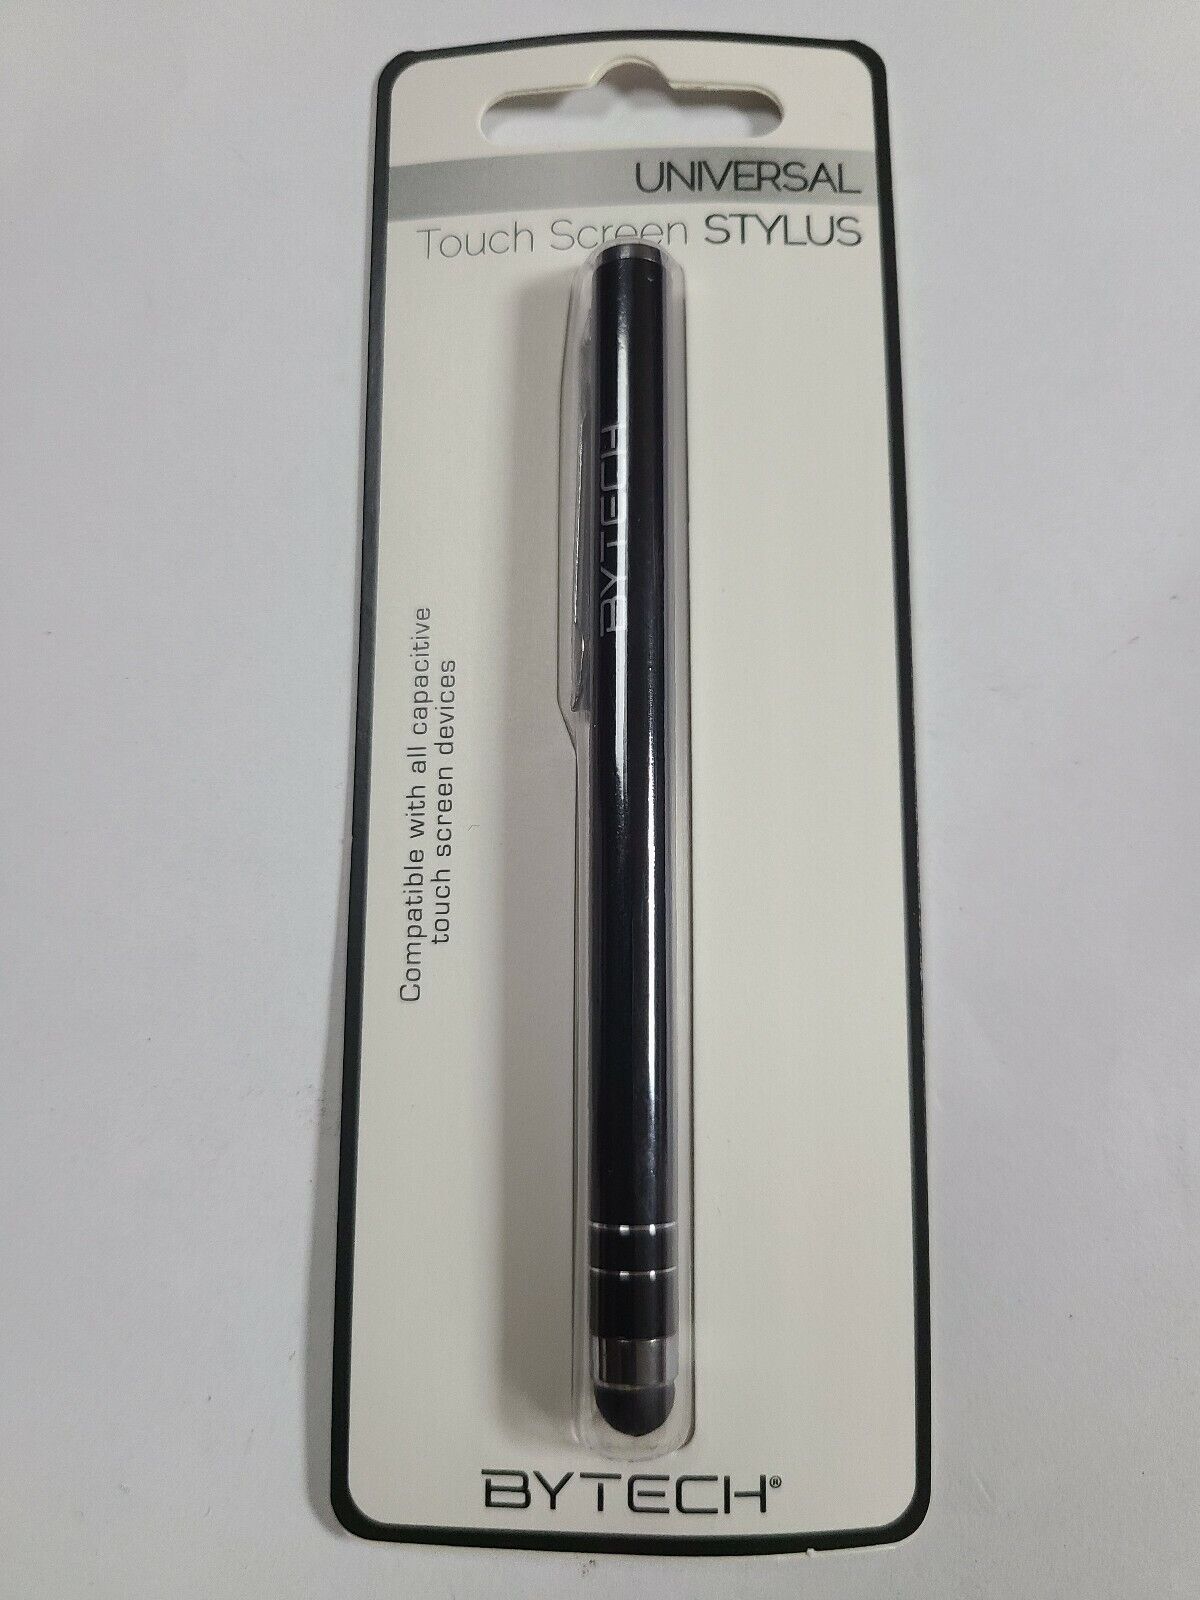 Case of 24 Bytech Universal Touch Screen Stylus Ultra Responsive BY-ST-RG-100-Bk